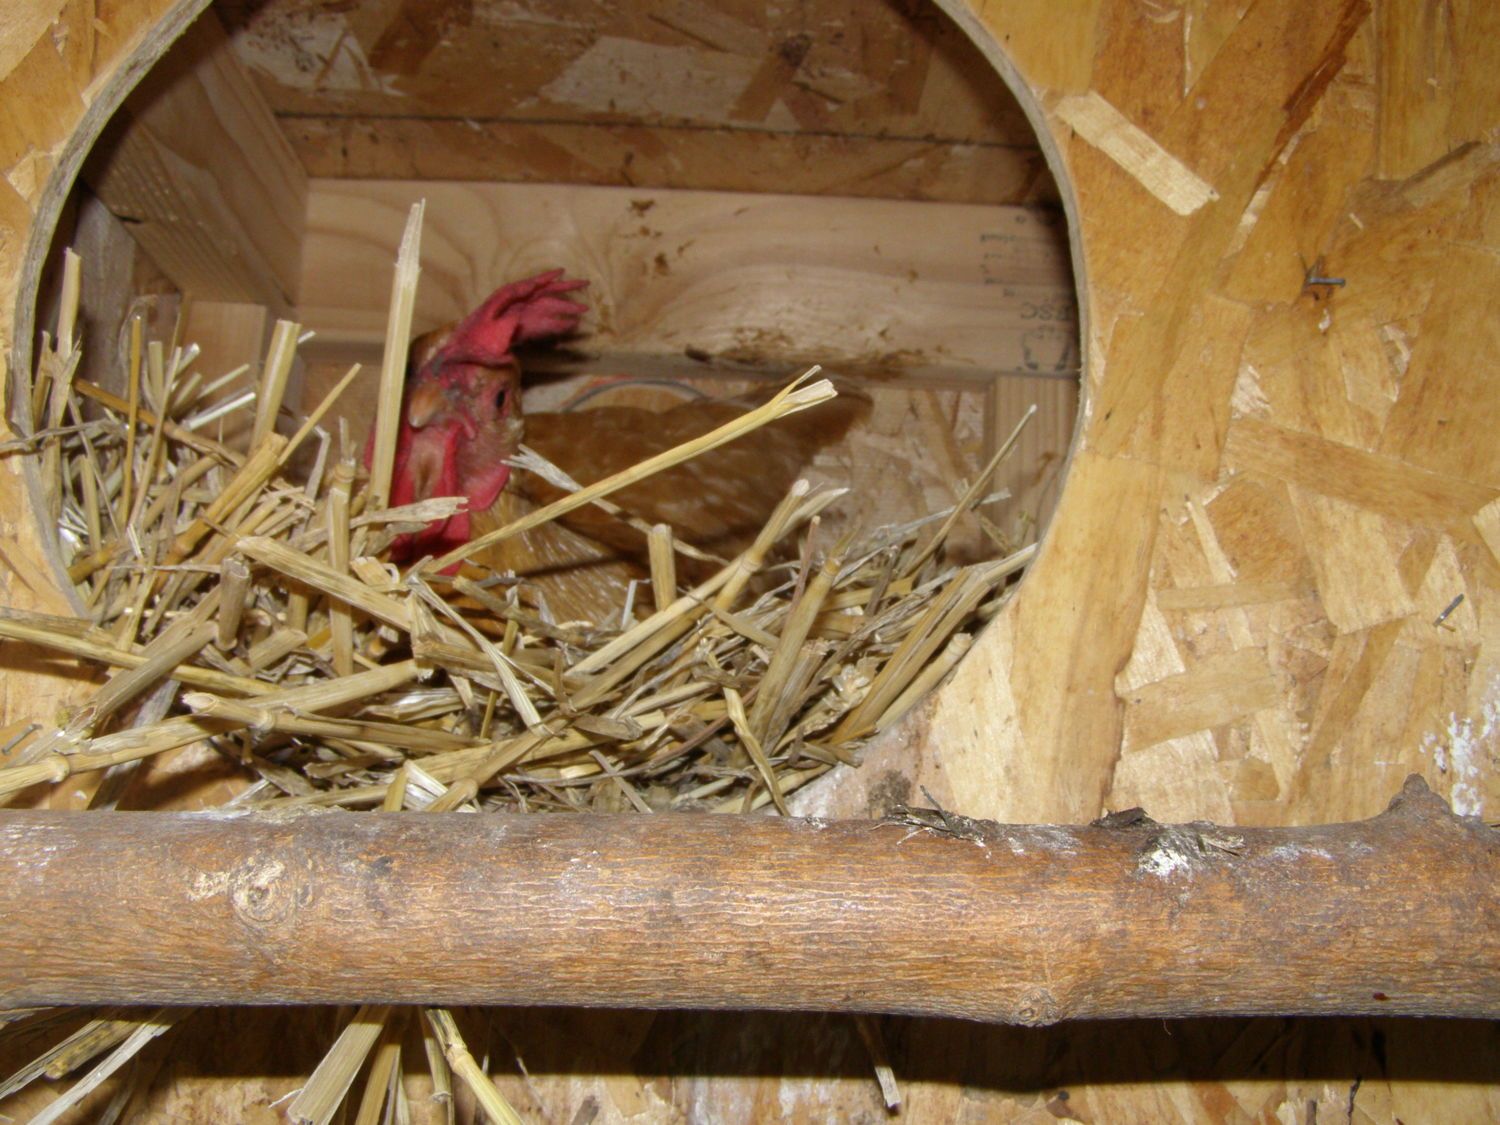 post your chicken coop pictures here! - Page 39